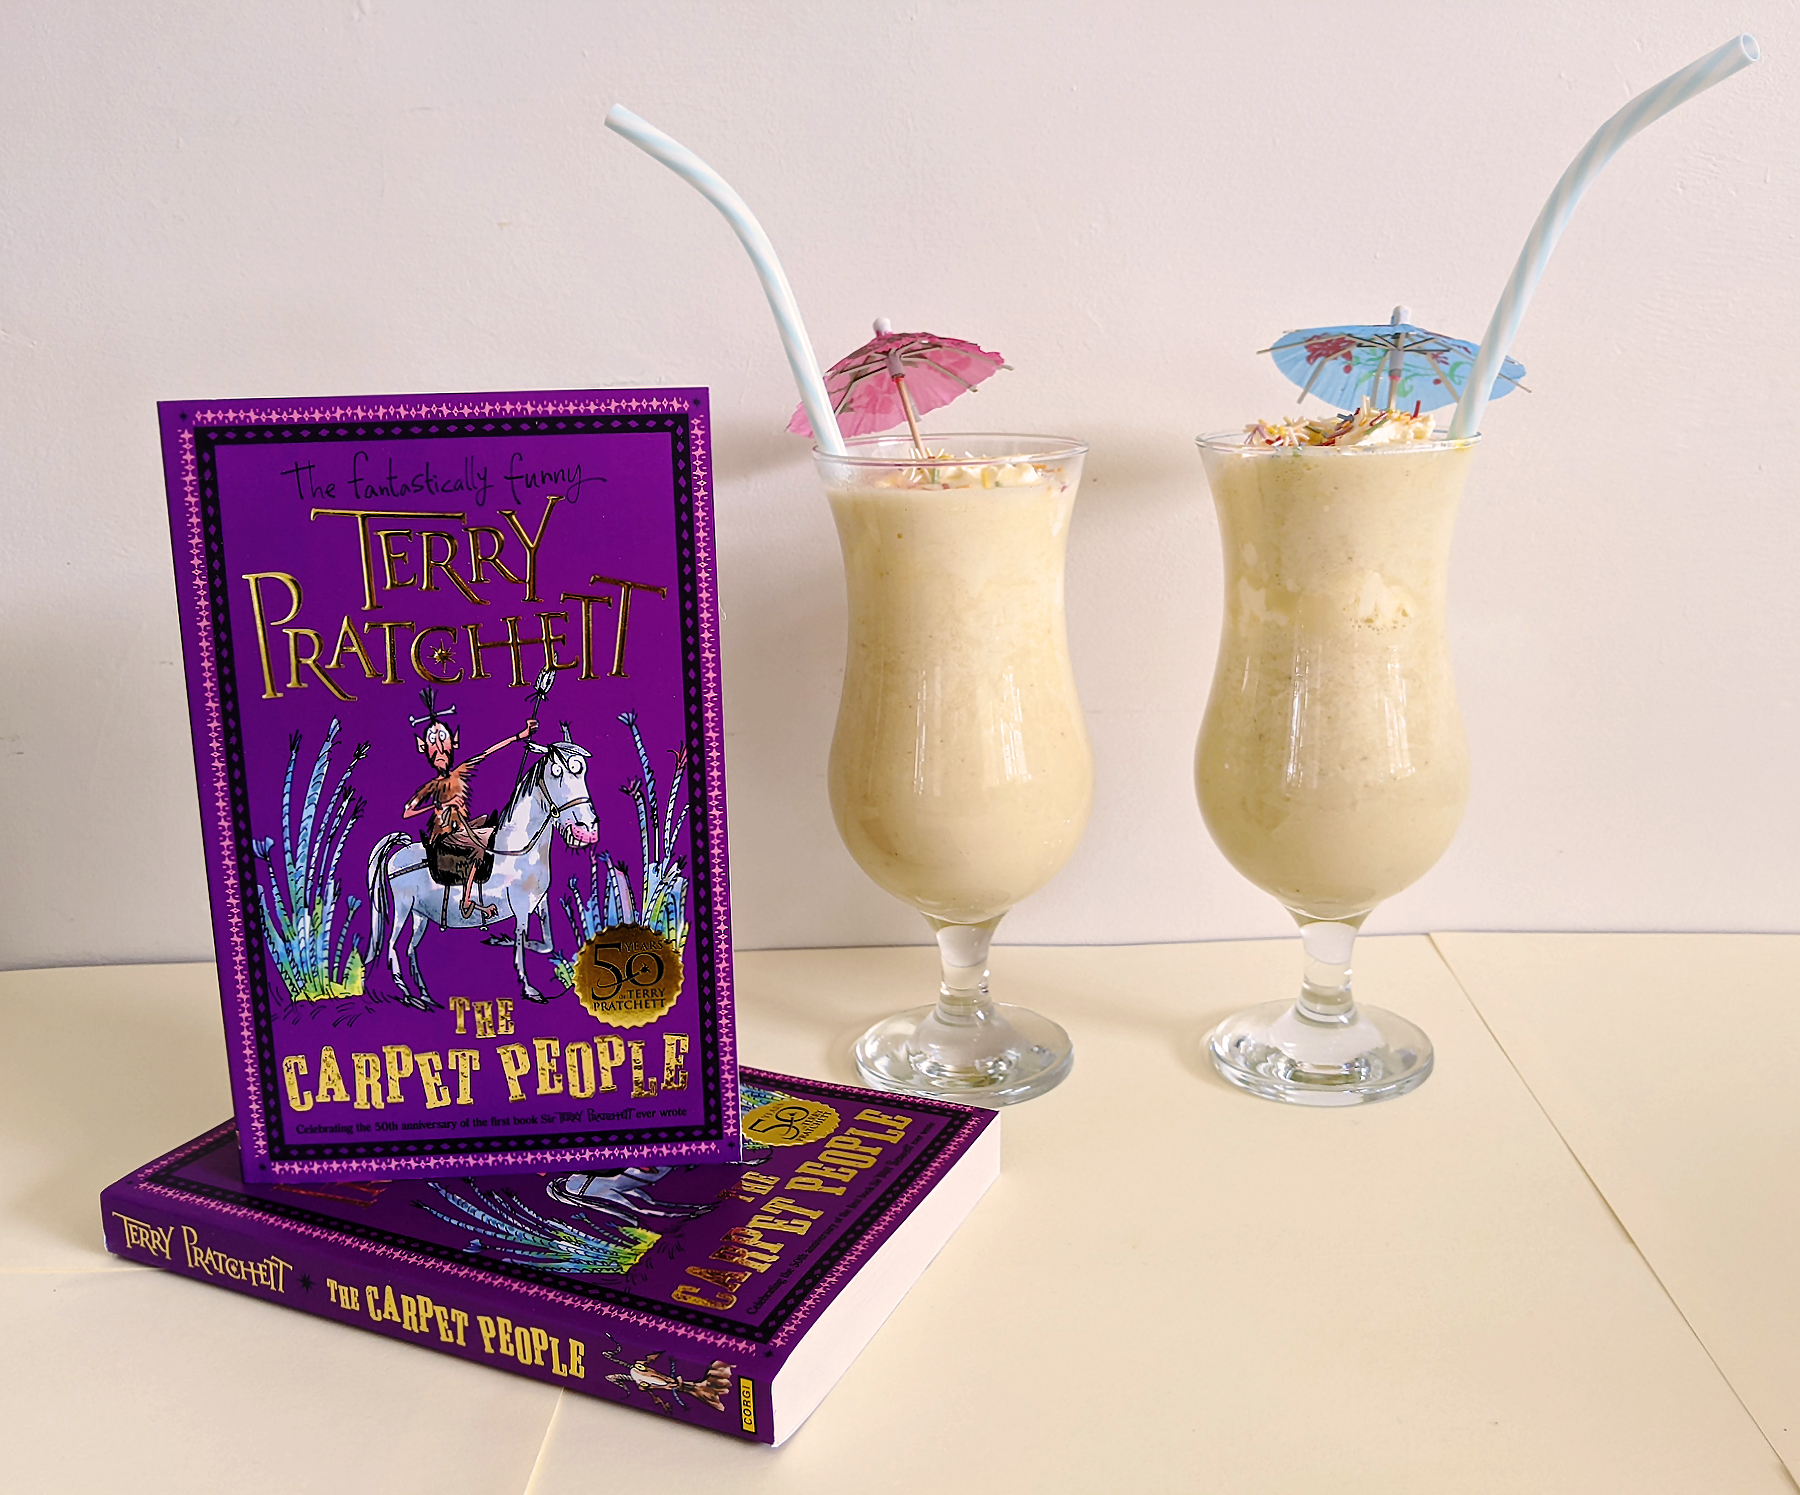 A photo of two copies of the 50th anniversary edition of The Carpet People by Terry Pratchett and two banana milkshakes in tall glasses with straws and mini umbrellas